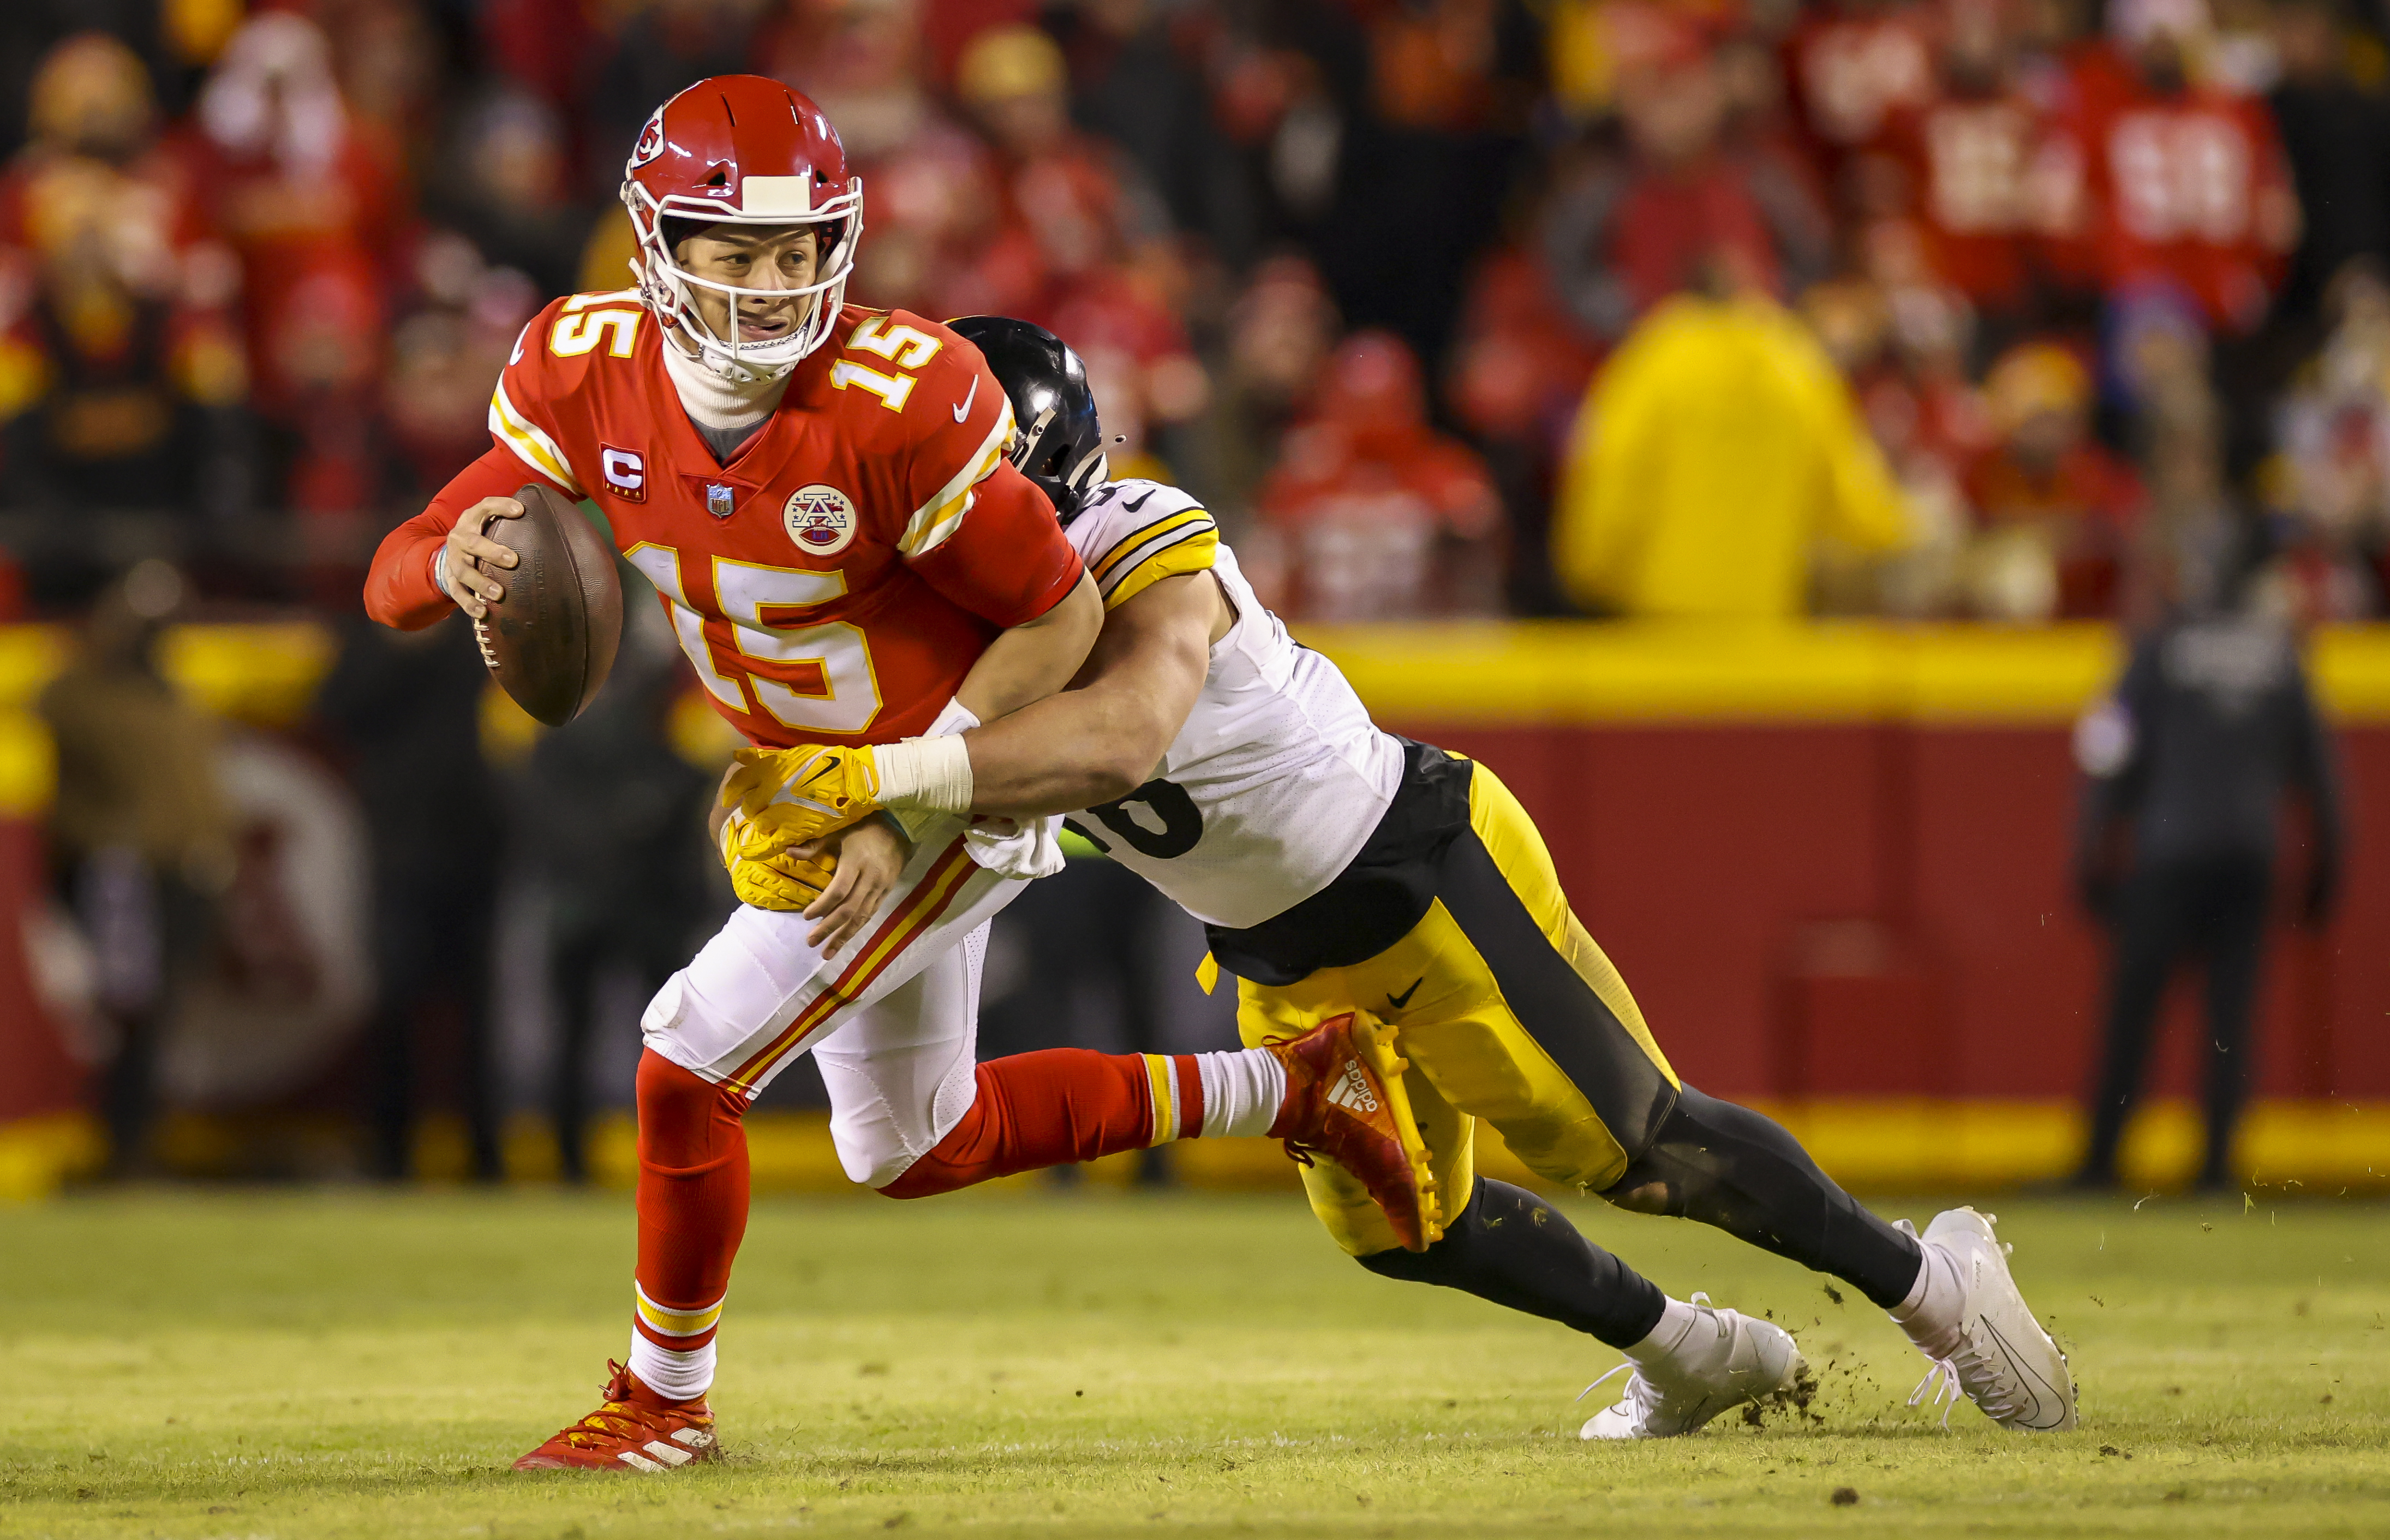 Alex Highsmith #56 of the Pittsburgh Steelers sacks Patrick Mahomes #15 of the Kansas City Chiefs for a loss during the first quarter of the AFC Wild Card Playoff game at Arrowhead Stadium on January 16, 2022 in Kansas City, Missouri.